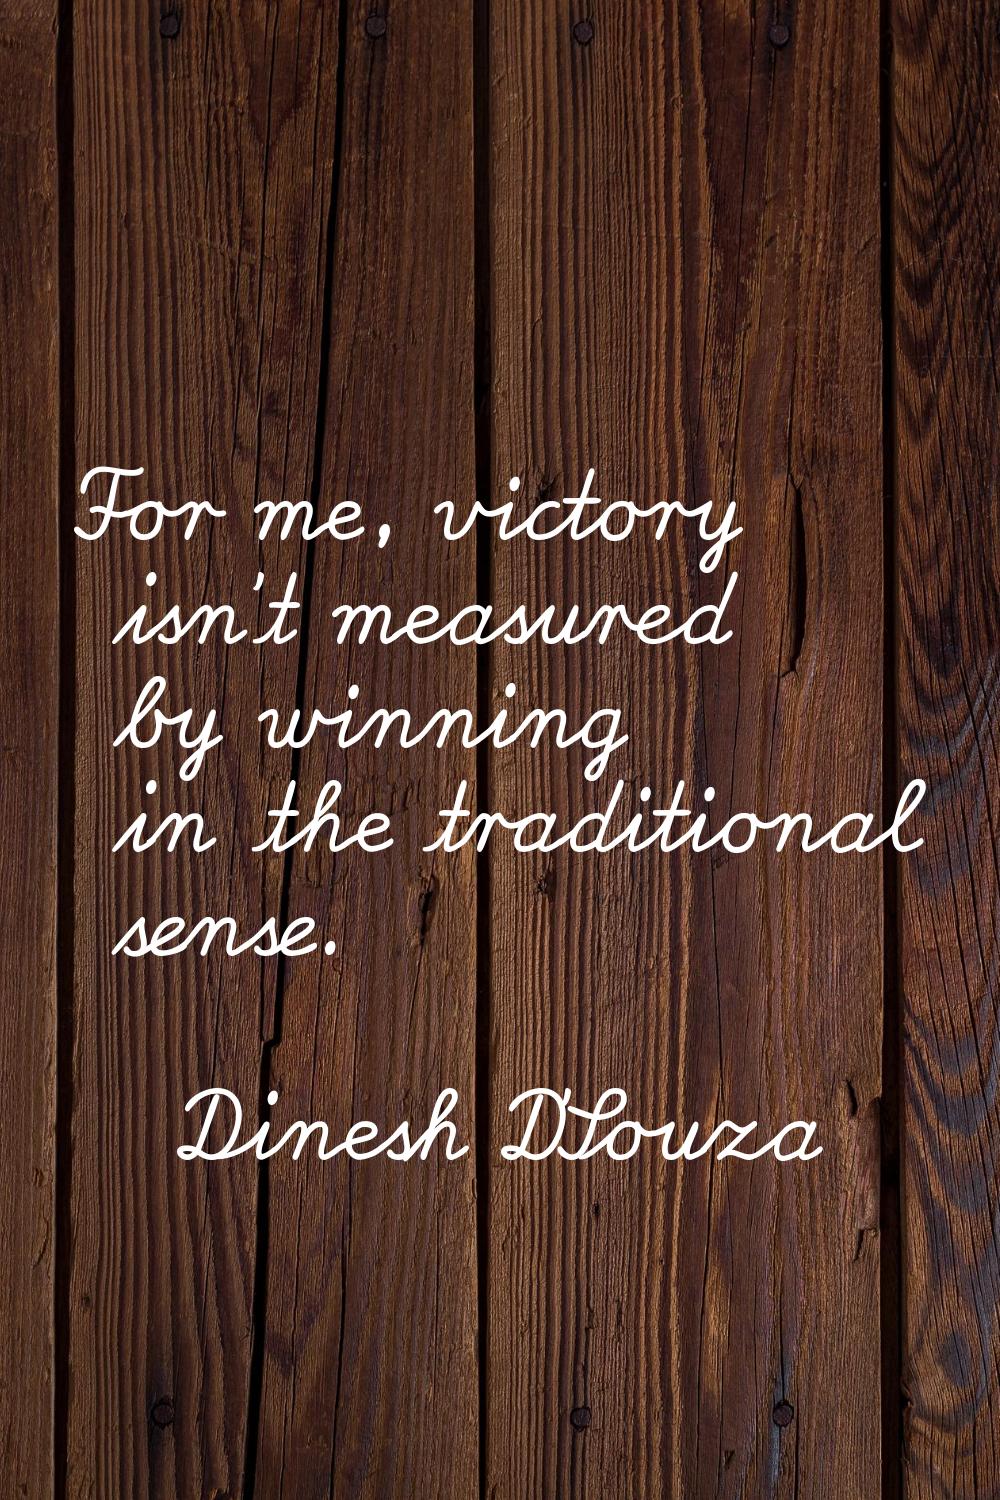 For me, victory isn't measured by winning in the traditional sense.